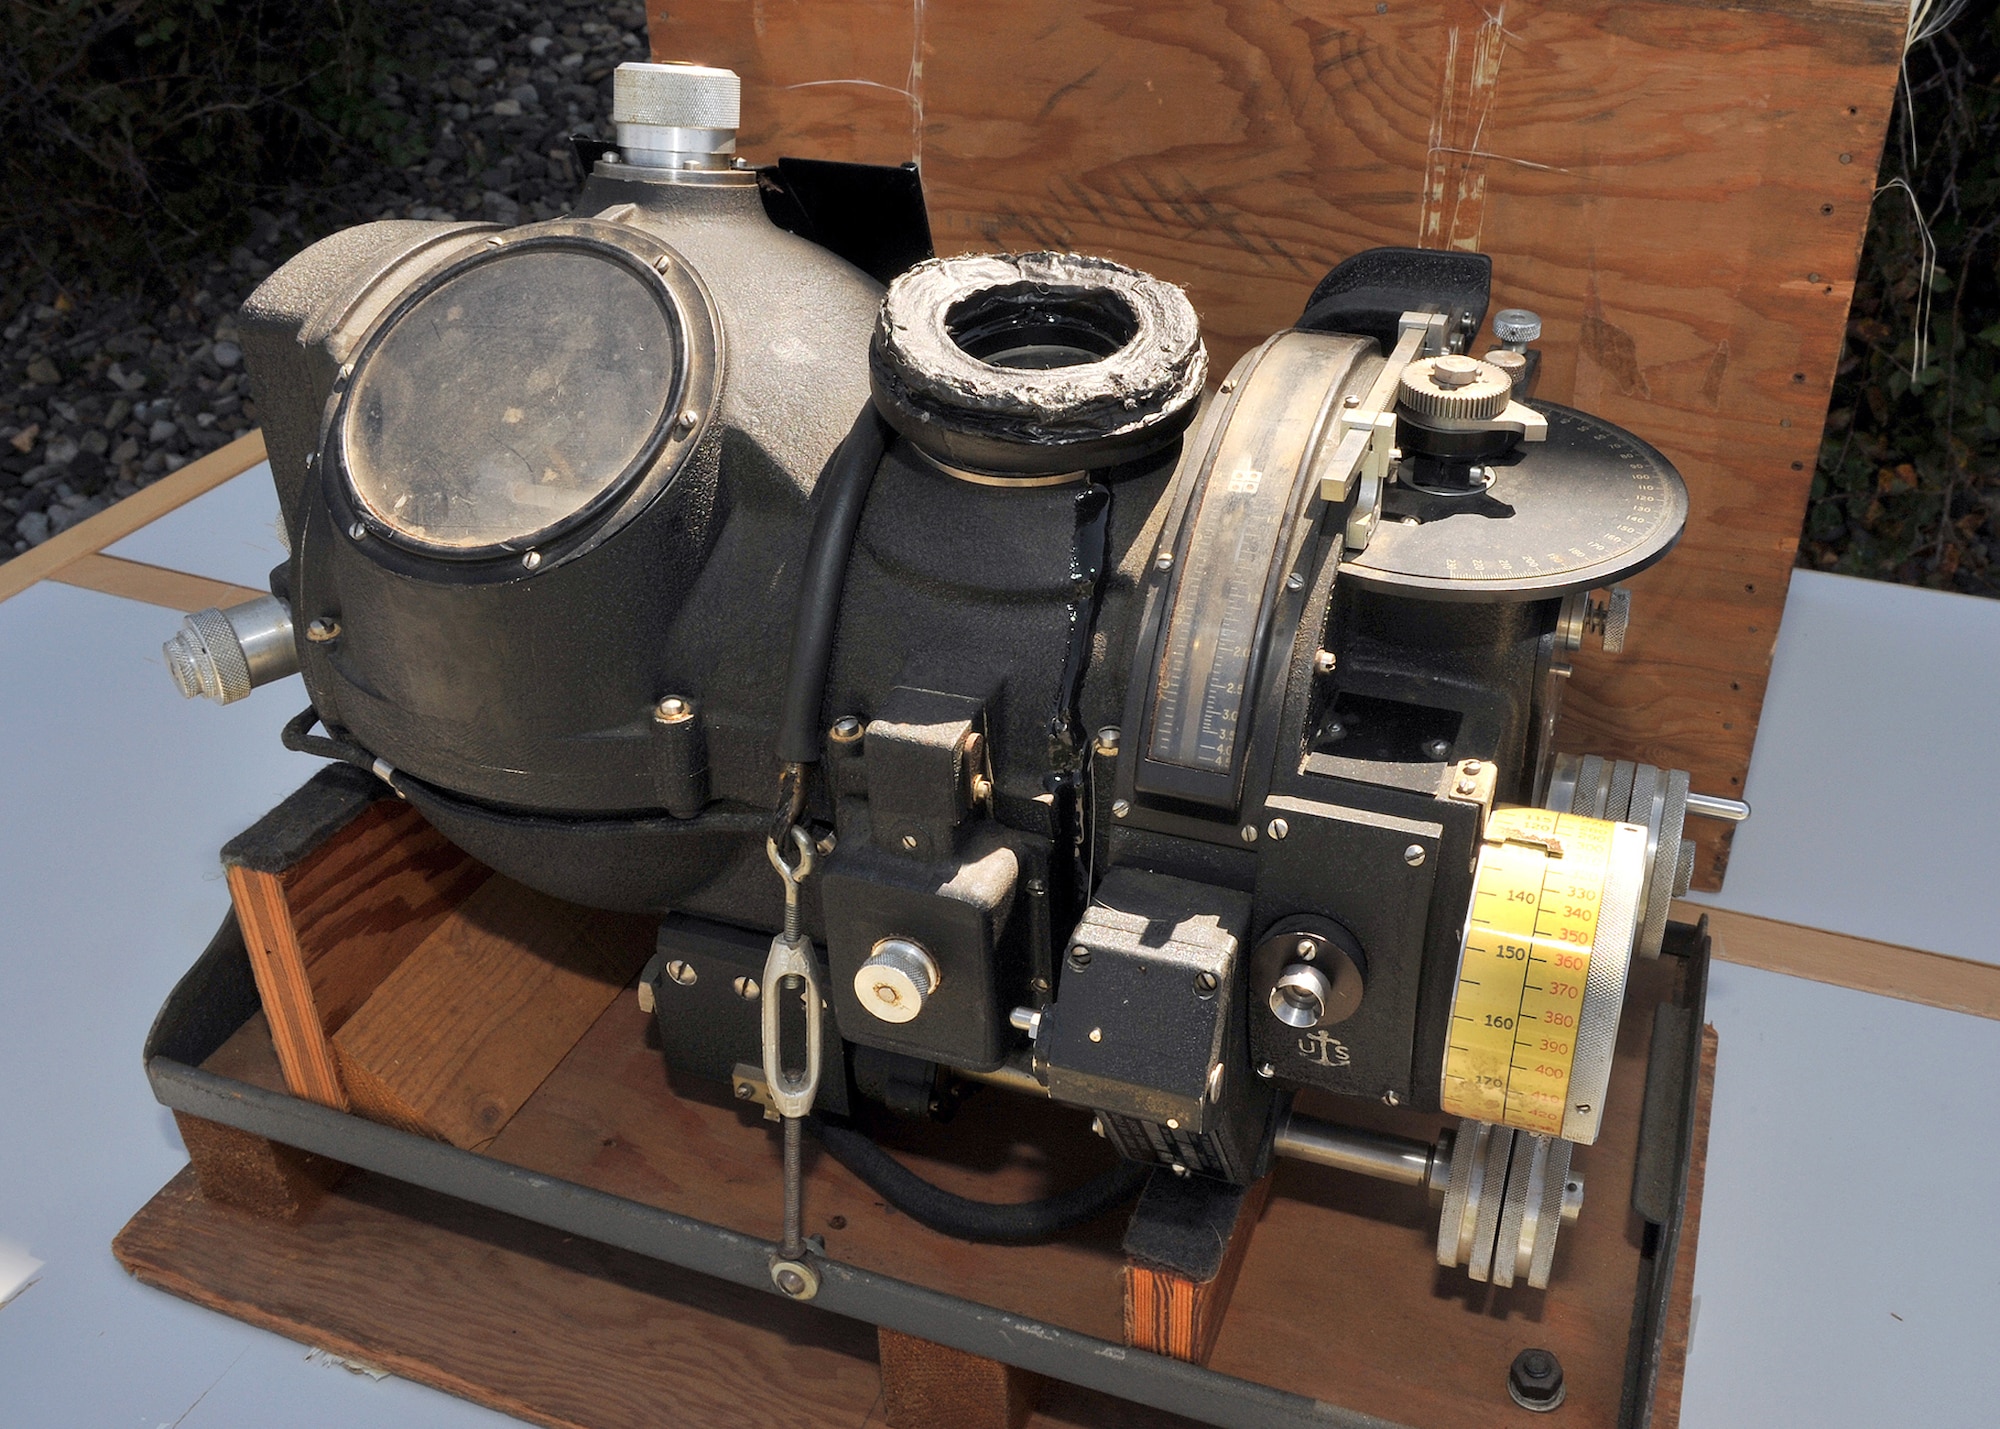 The Norden Bombsight sits on display outside of the Malmstrom Museum during the donation ceremony Aug. 19.